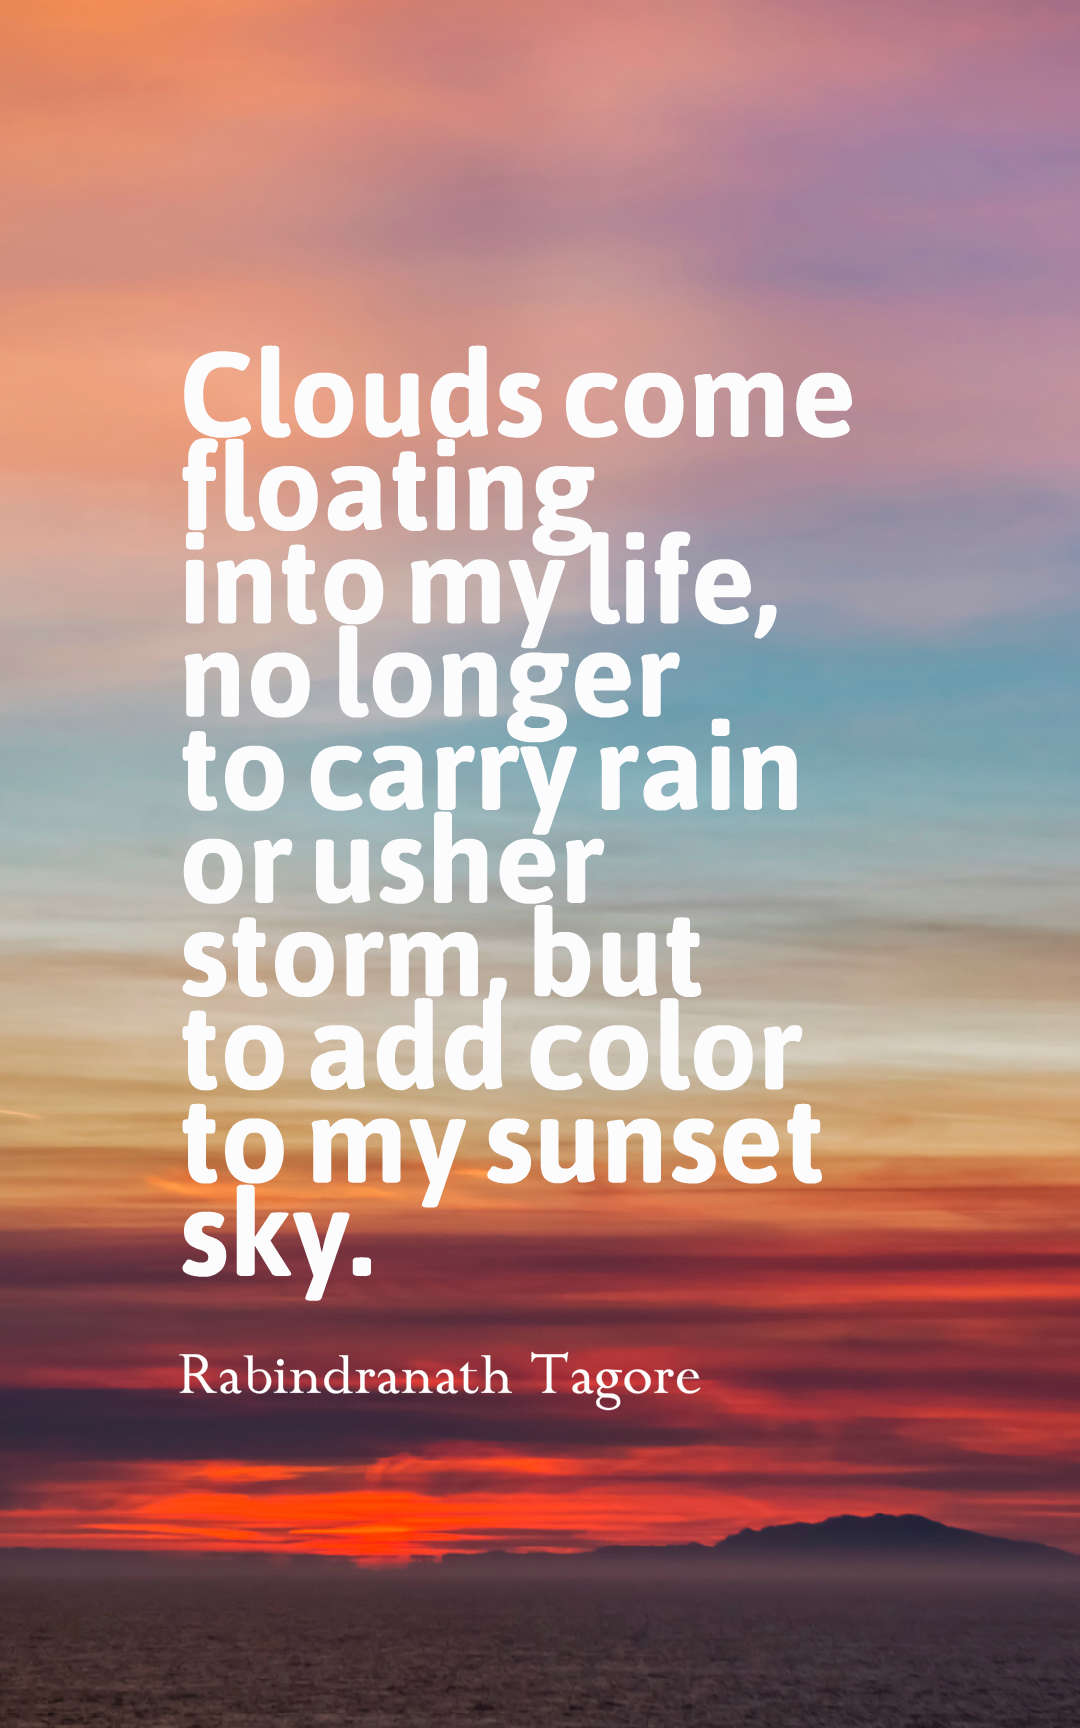 Clouds come floating into my life, no longer to carry rain or usher storm, but to add color to my sunset sky.